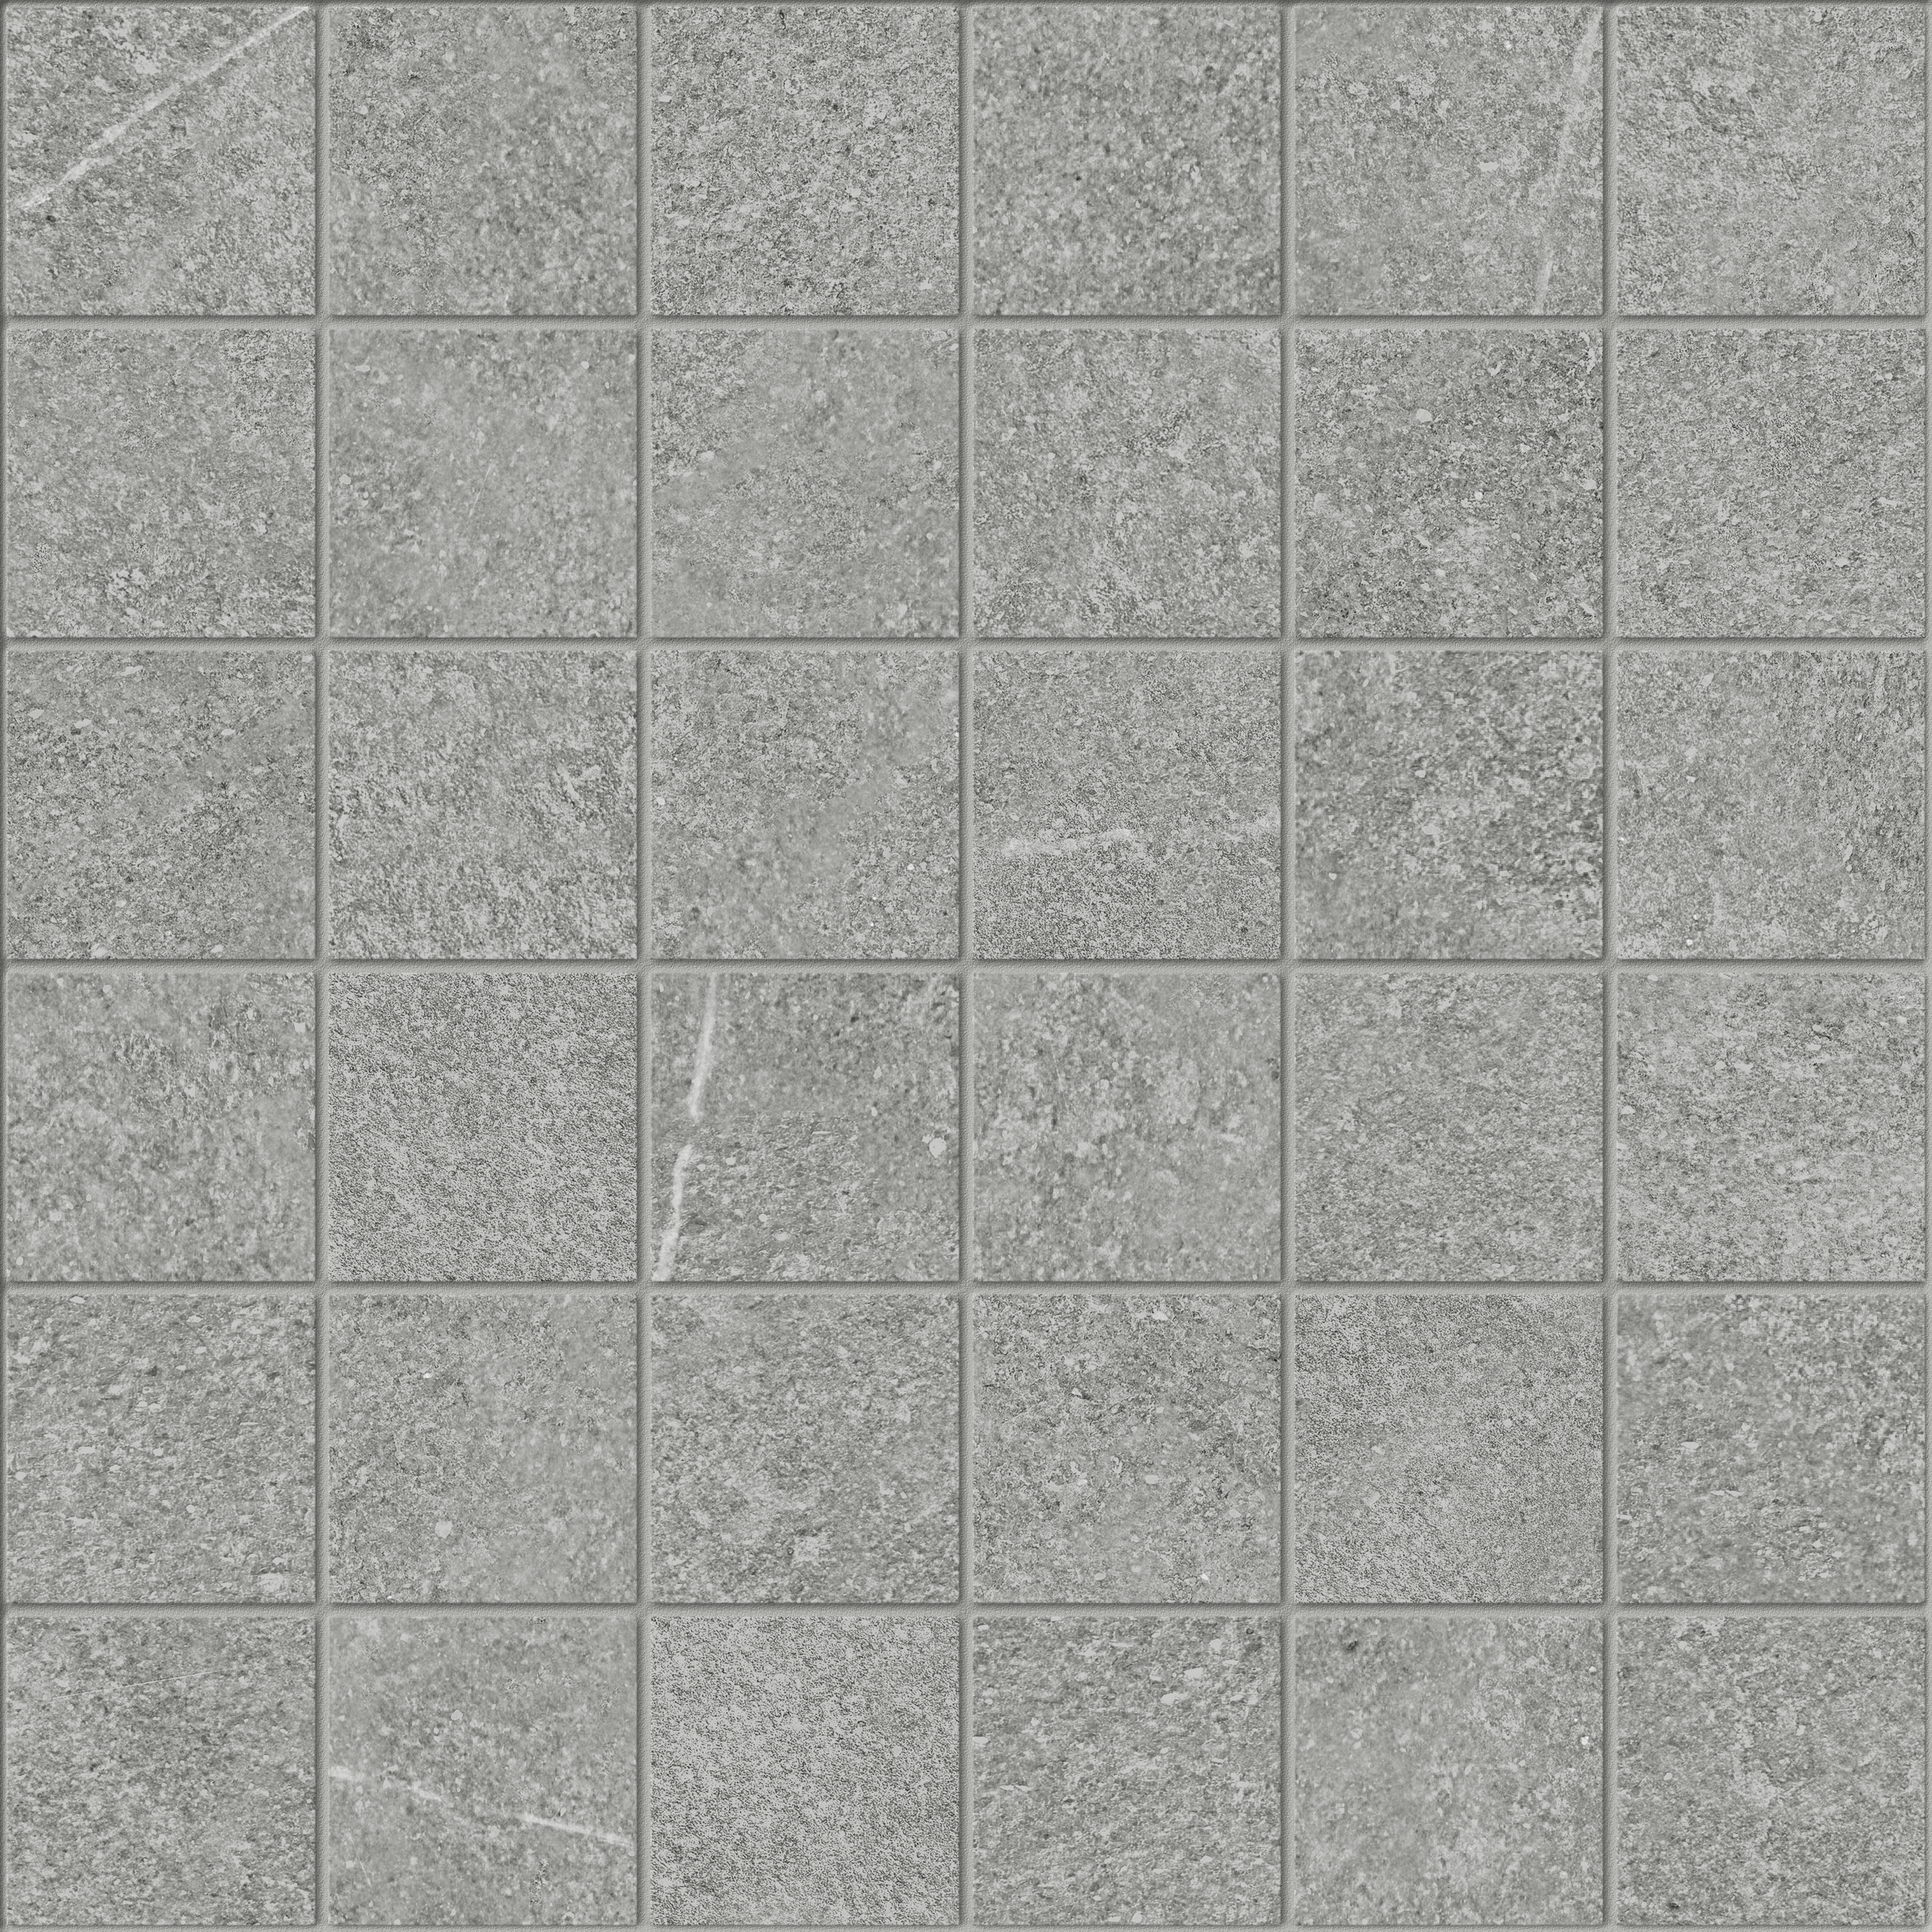 mica straight stack 2x2-inch pattern color body porcelain mosaic from mjork anatolia collection distributed by surface group international matte finish straight edge edge mesh shape